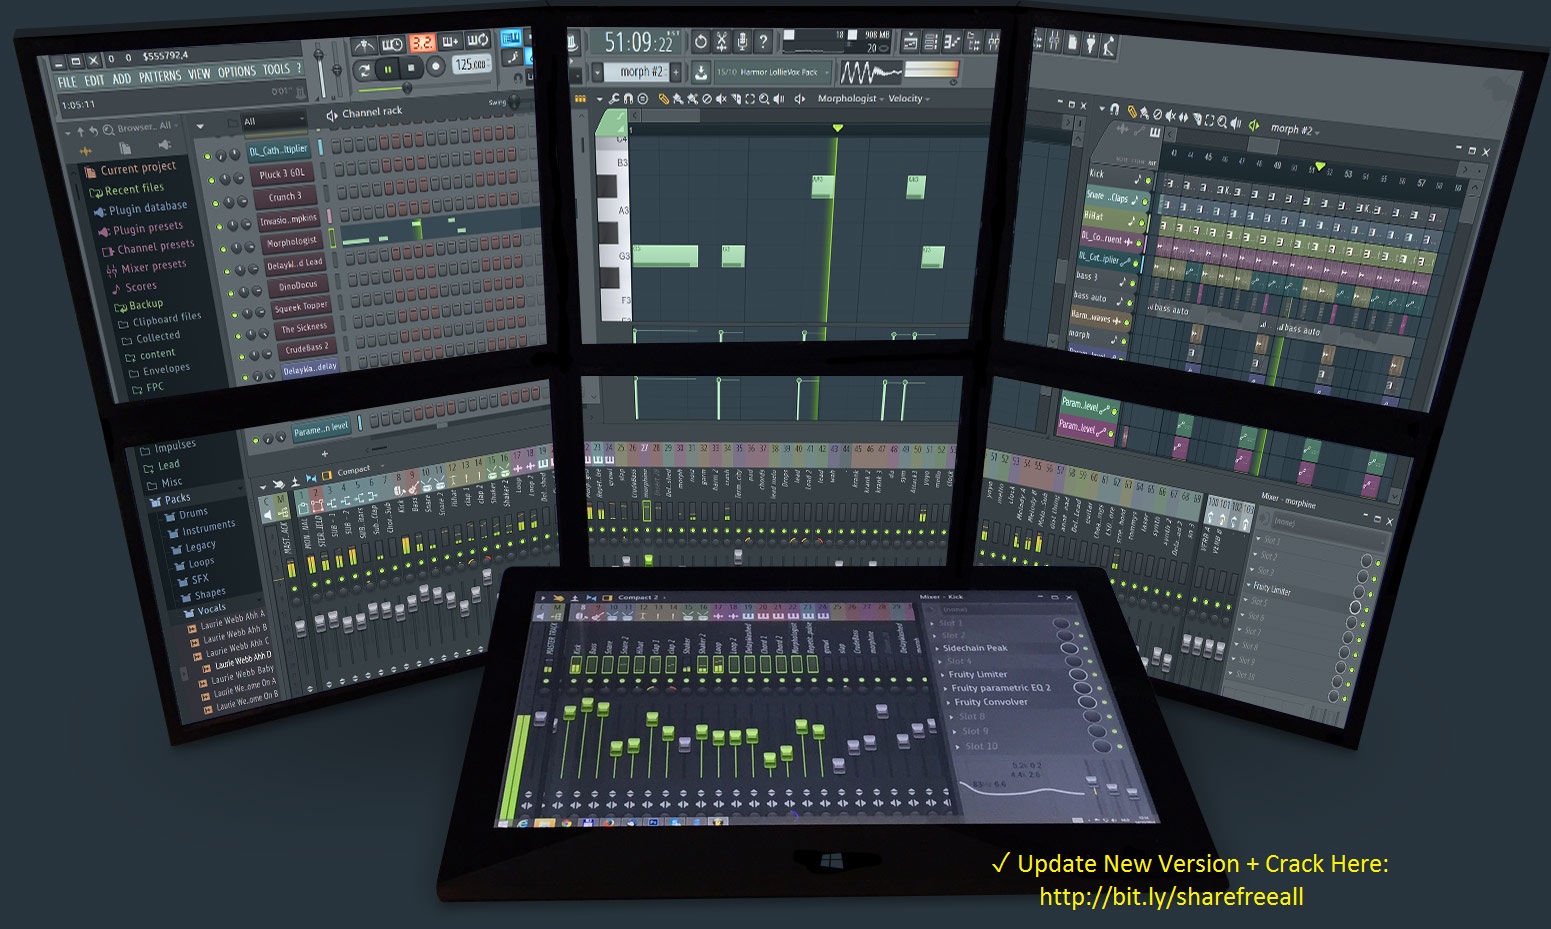 get fl studio 12 producer edition for free